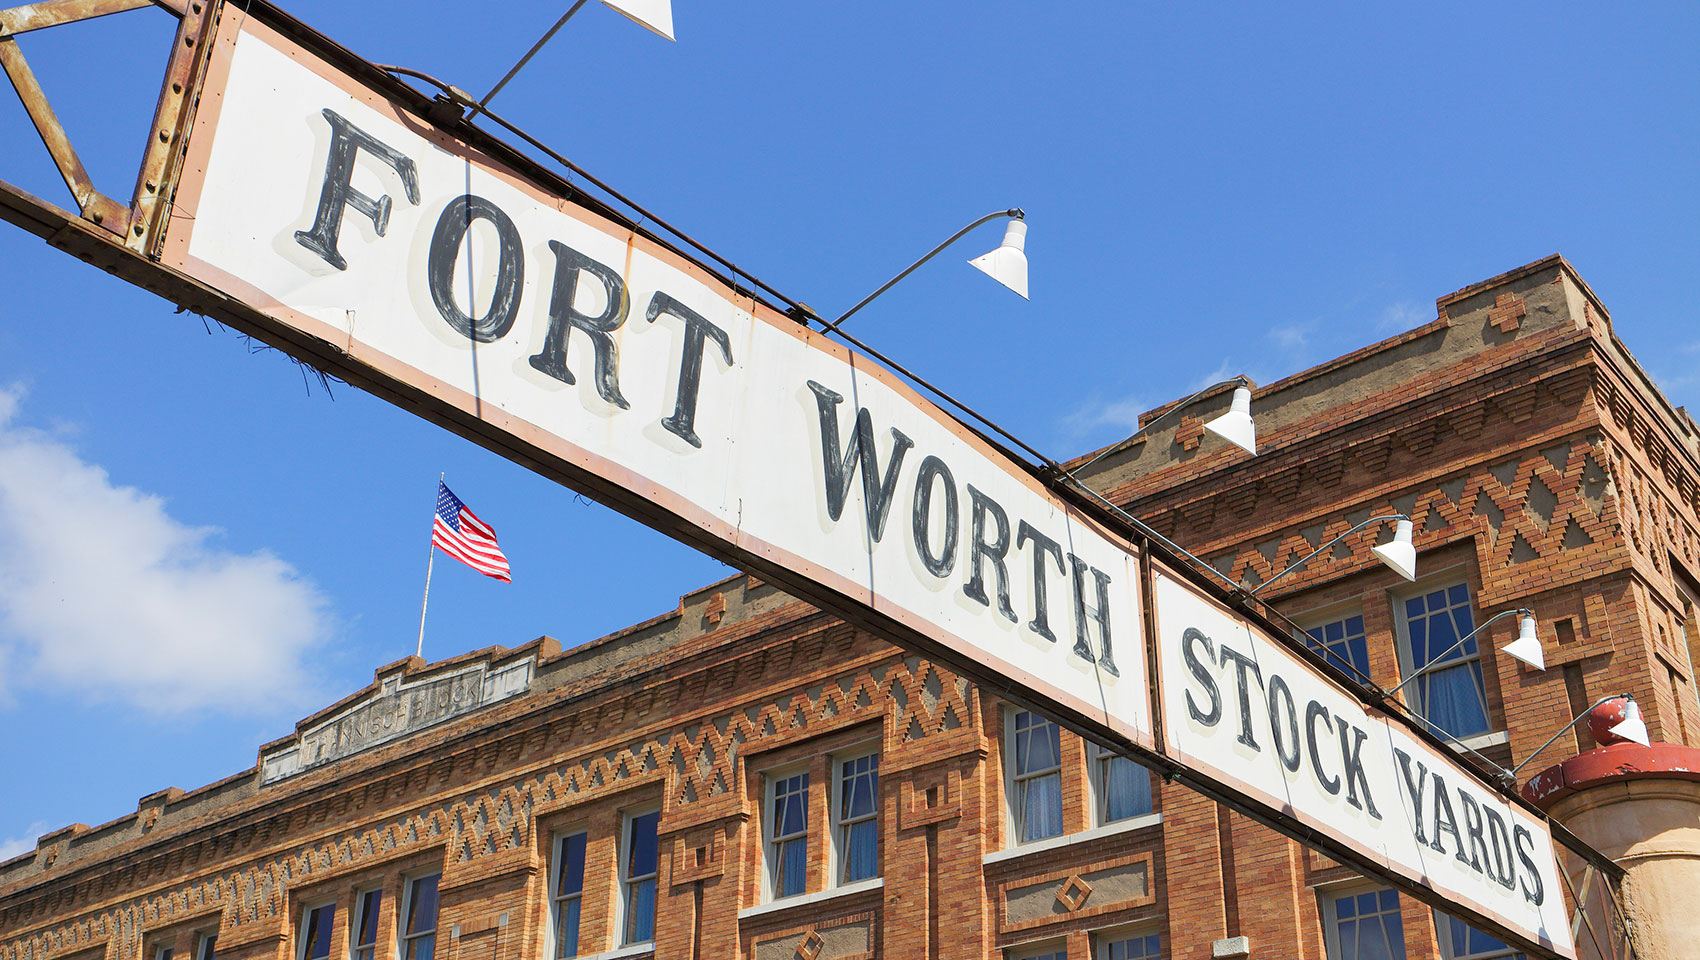 stock yards sign